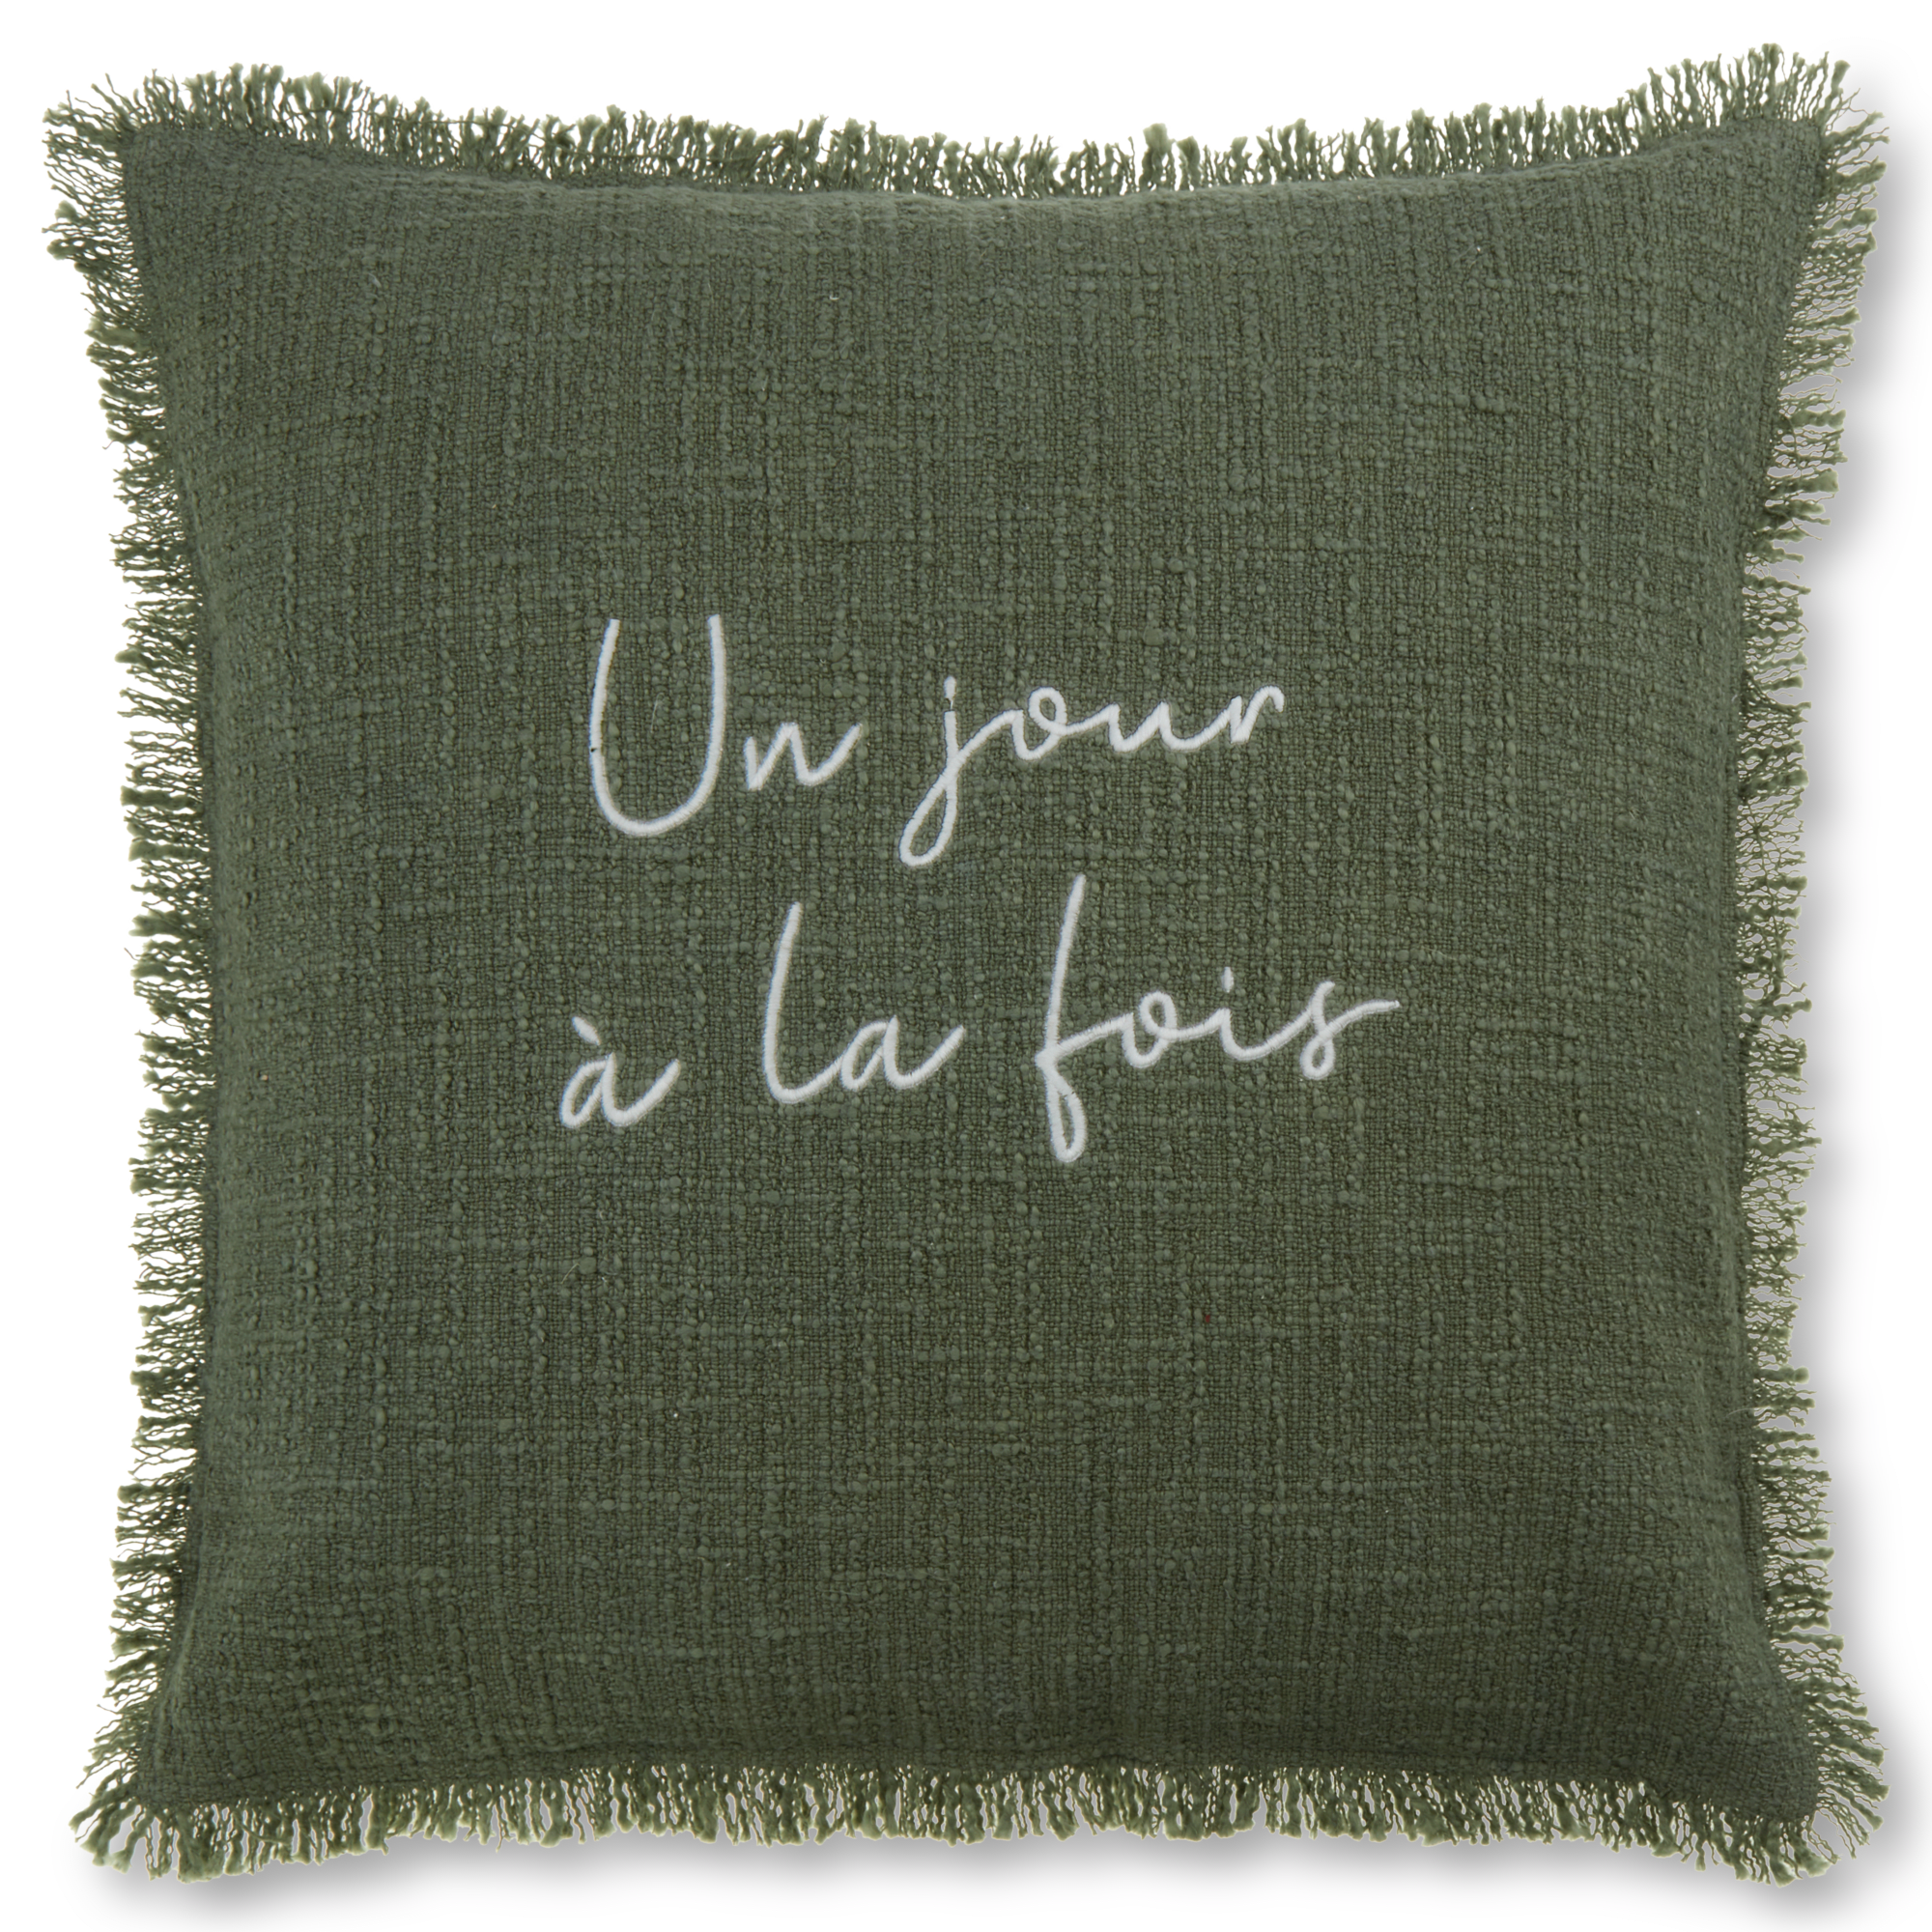 Mohira Inspiring Embroidery and Fringe Sage Throw Pillow Cover 